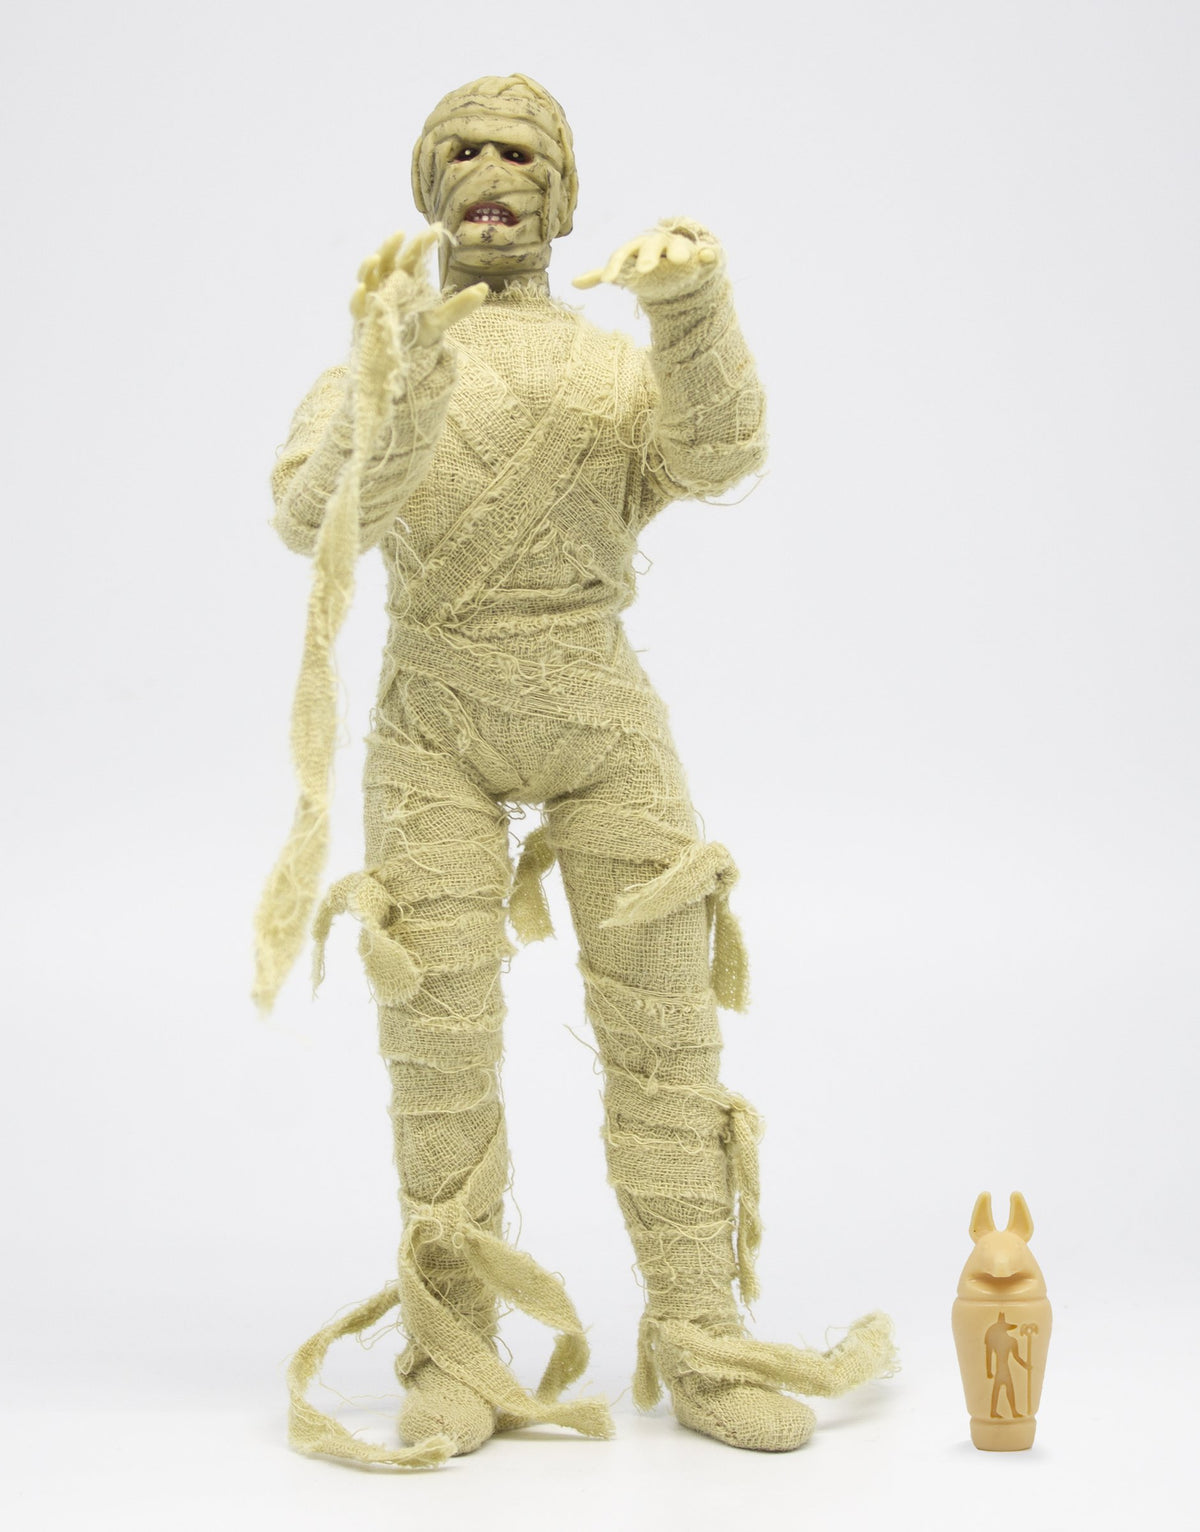 Mego Horror Wave 7 - The Mummy 8" Action Figure - Zlc Collectibles